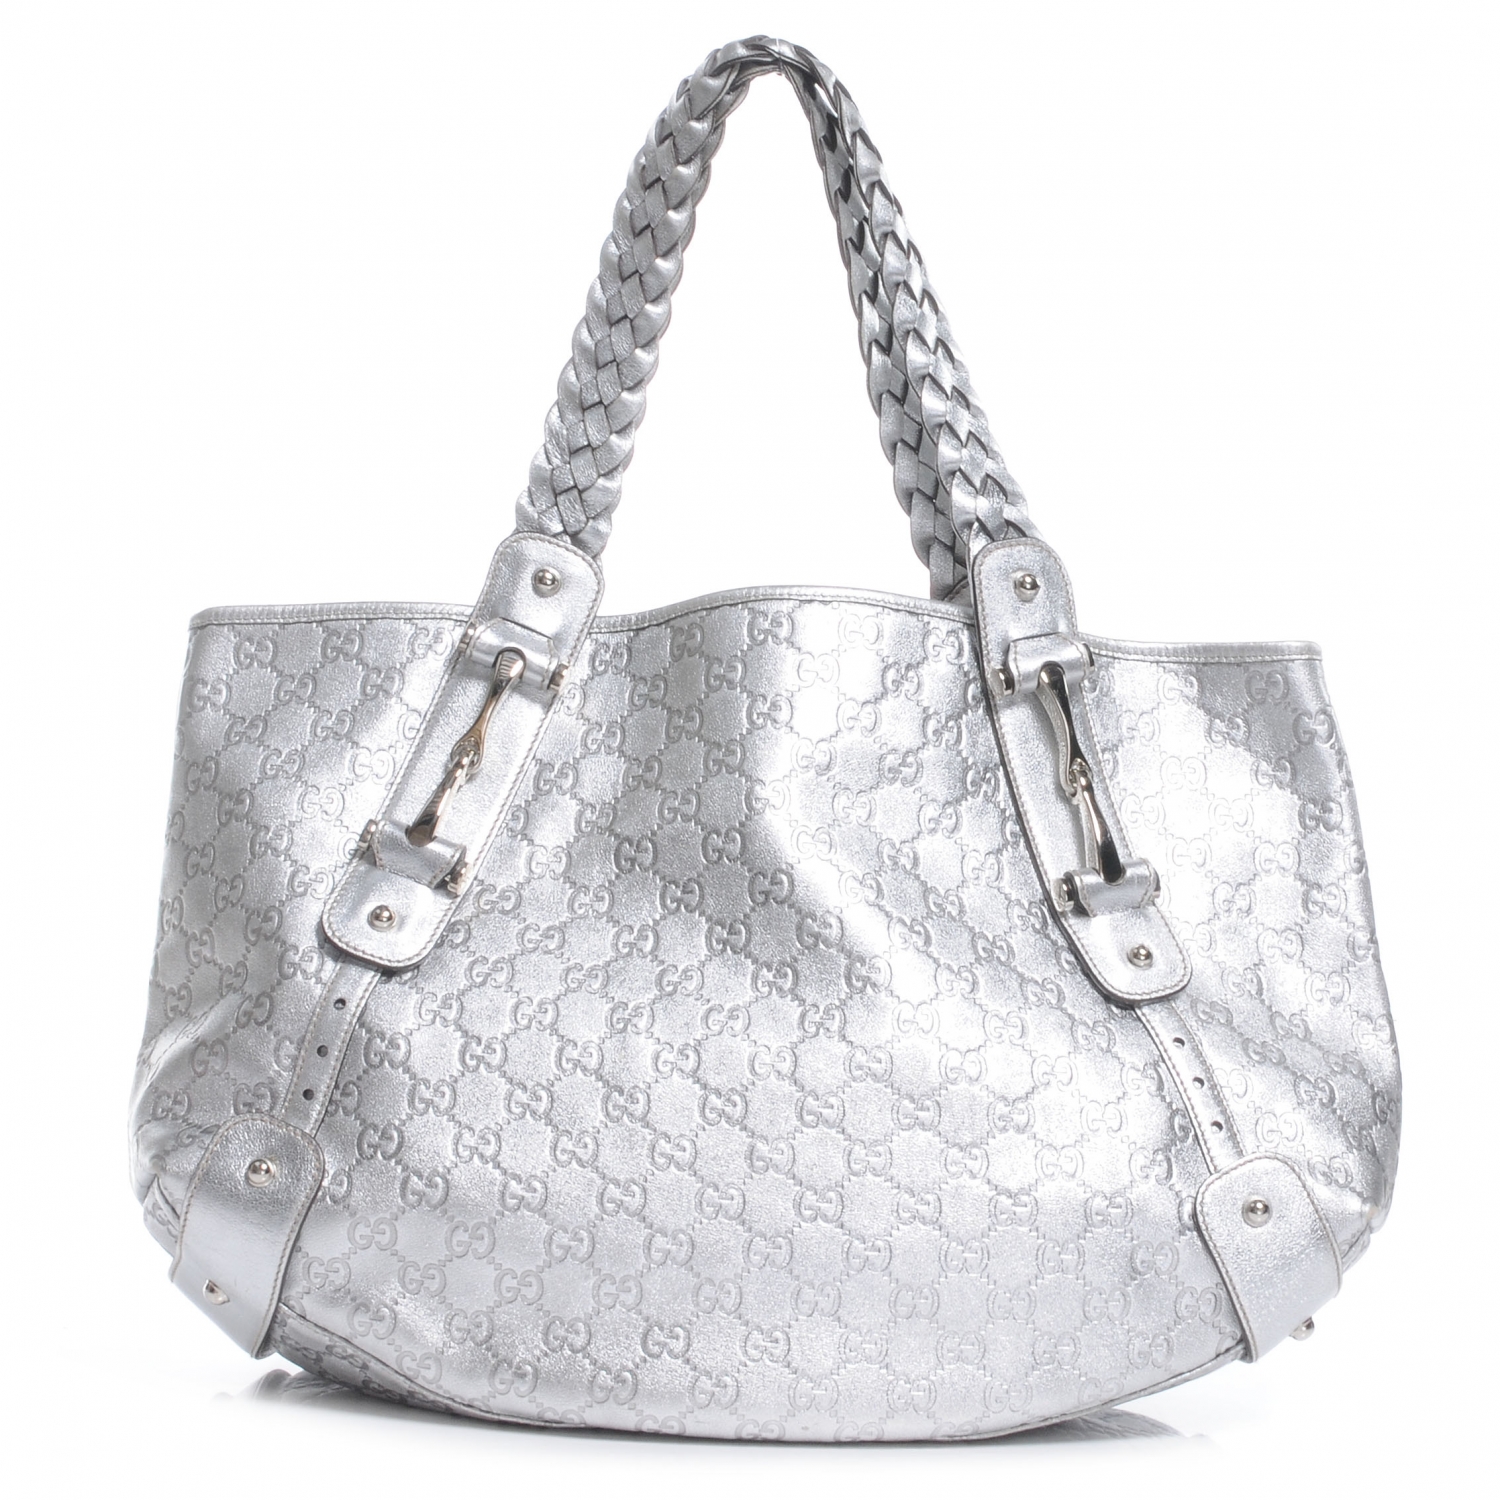 silver gucci purse, OFF 75%,welcome to buy!